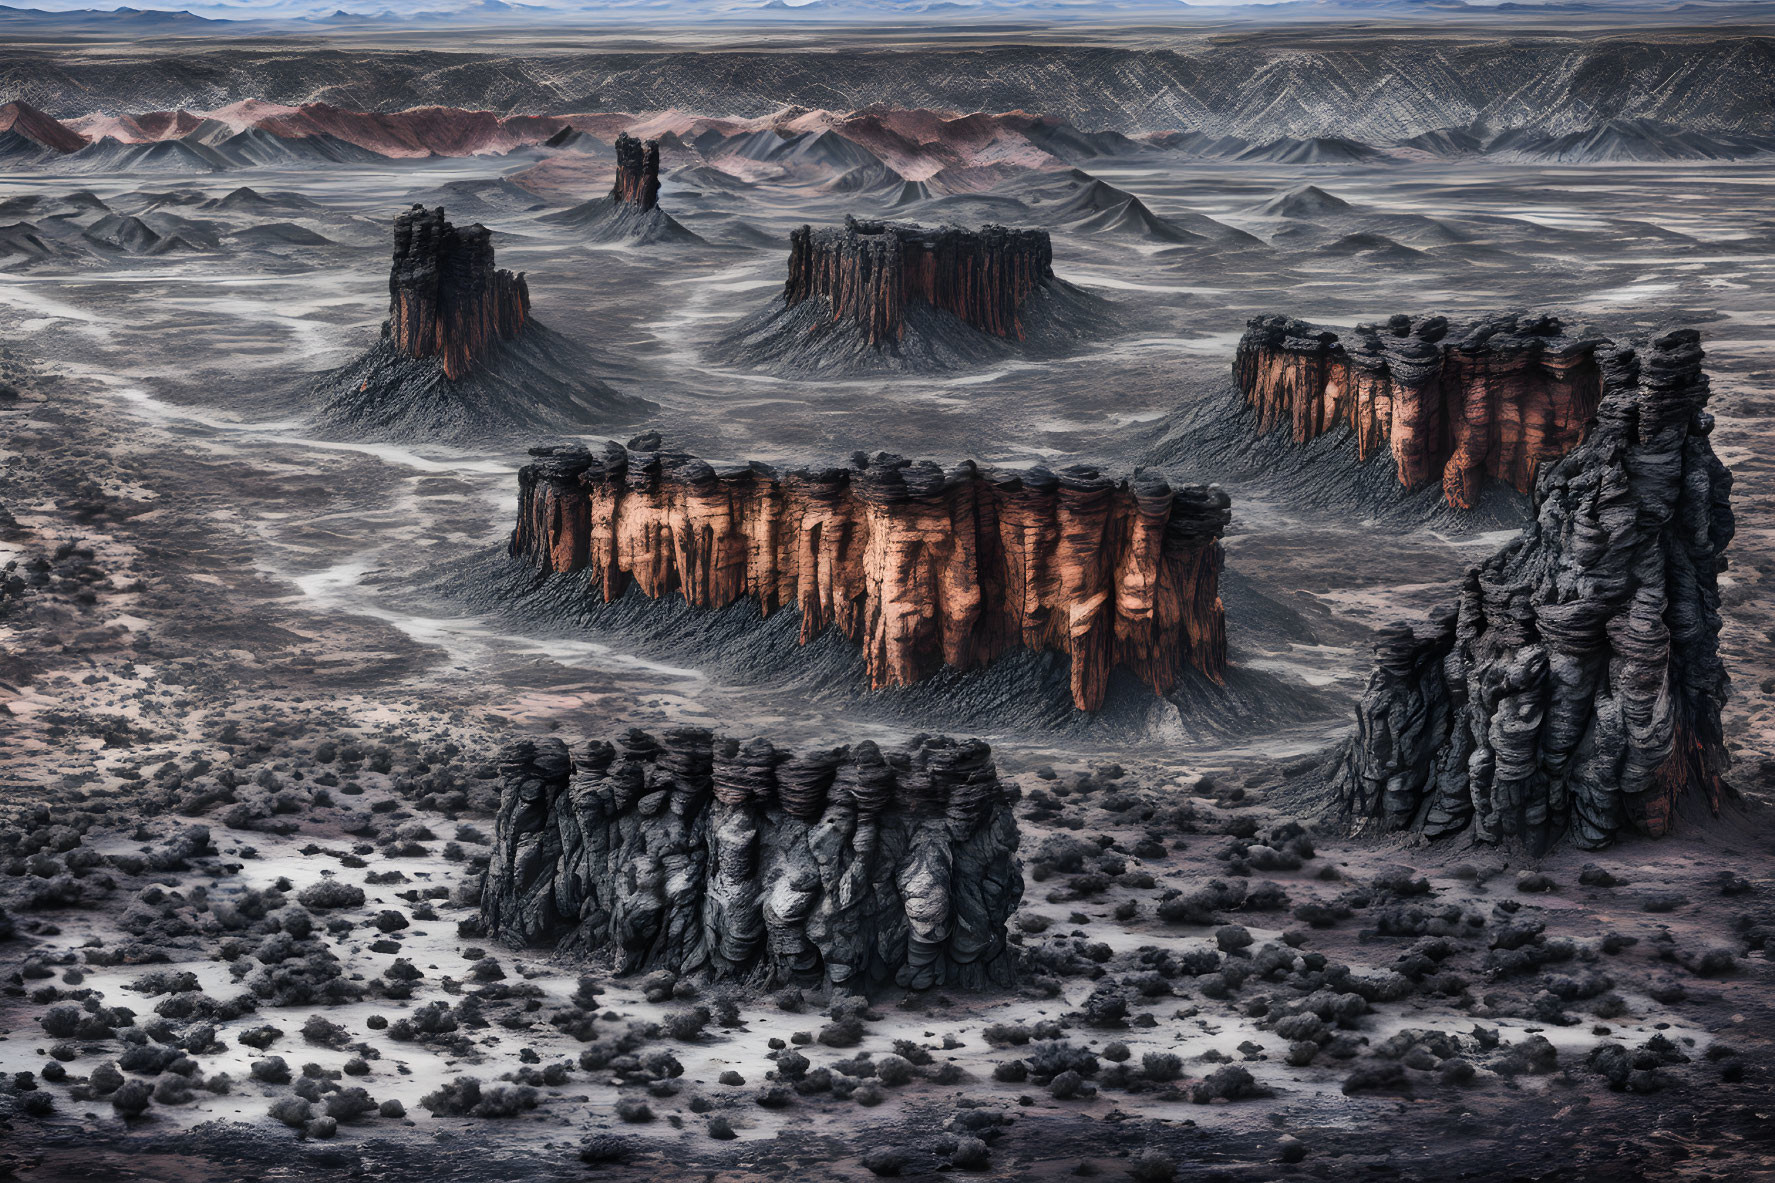 Rugged Landscape with Towering Rock Formations in Desert Valley